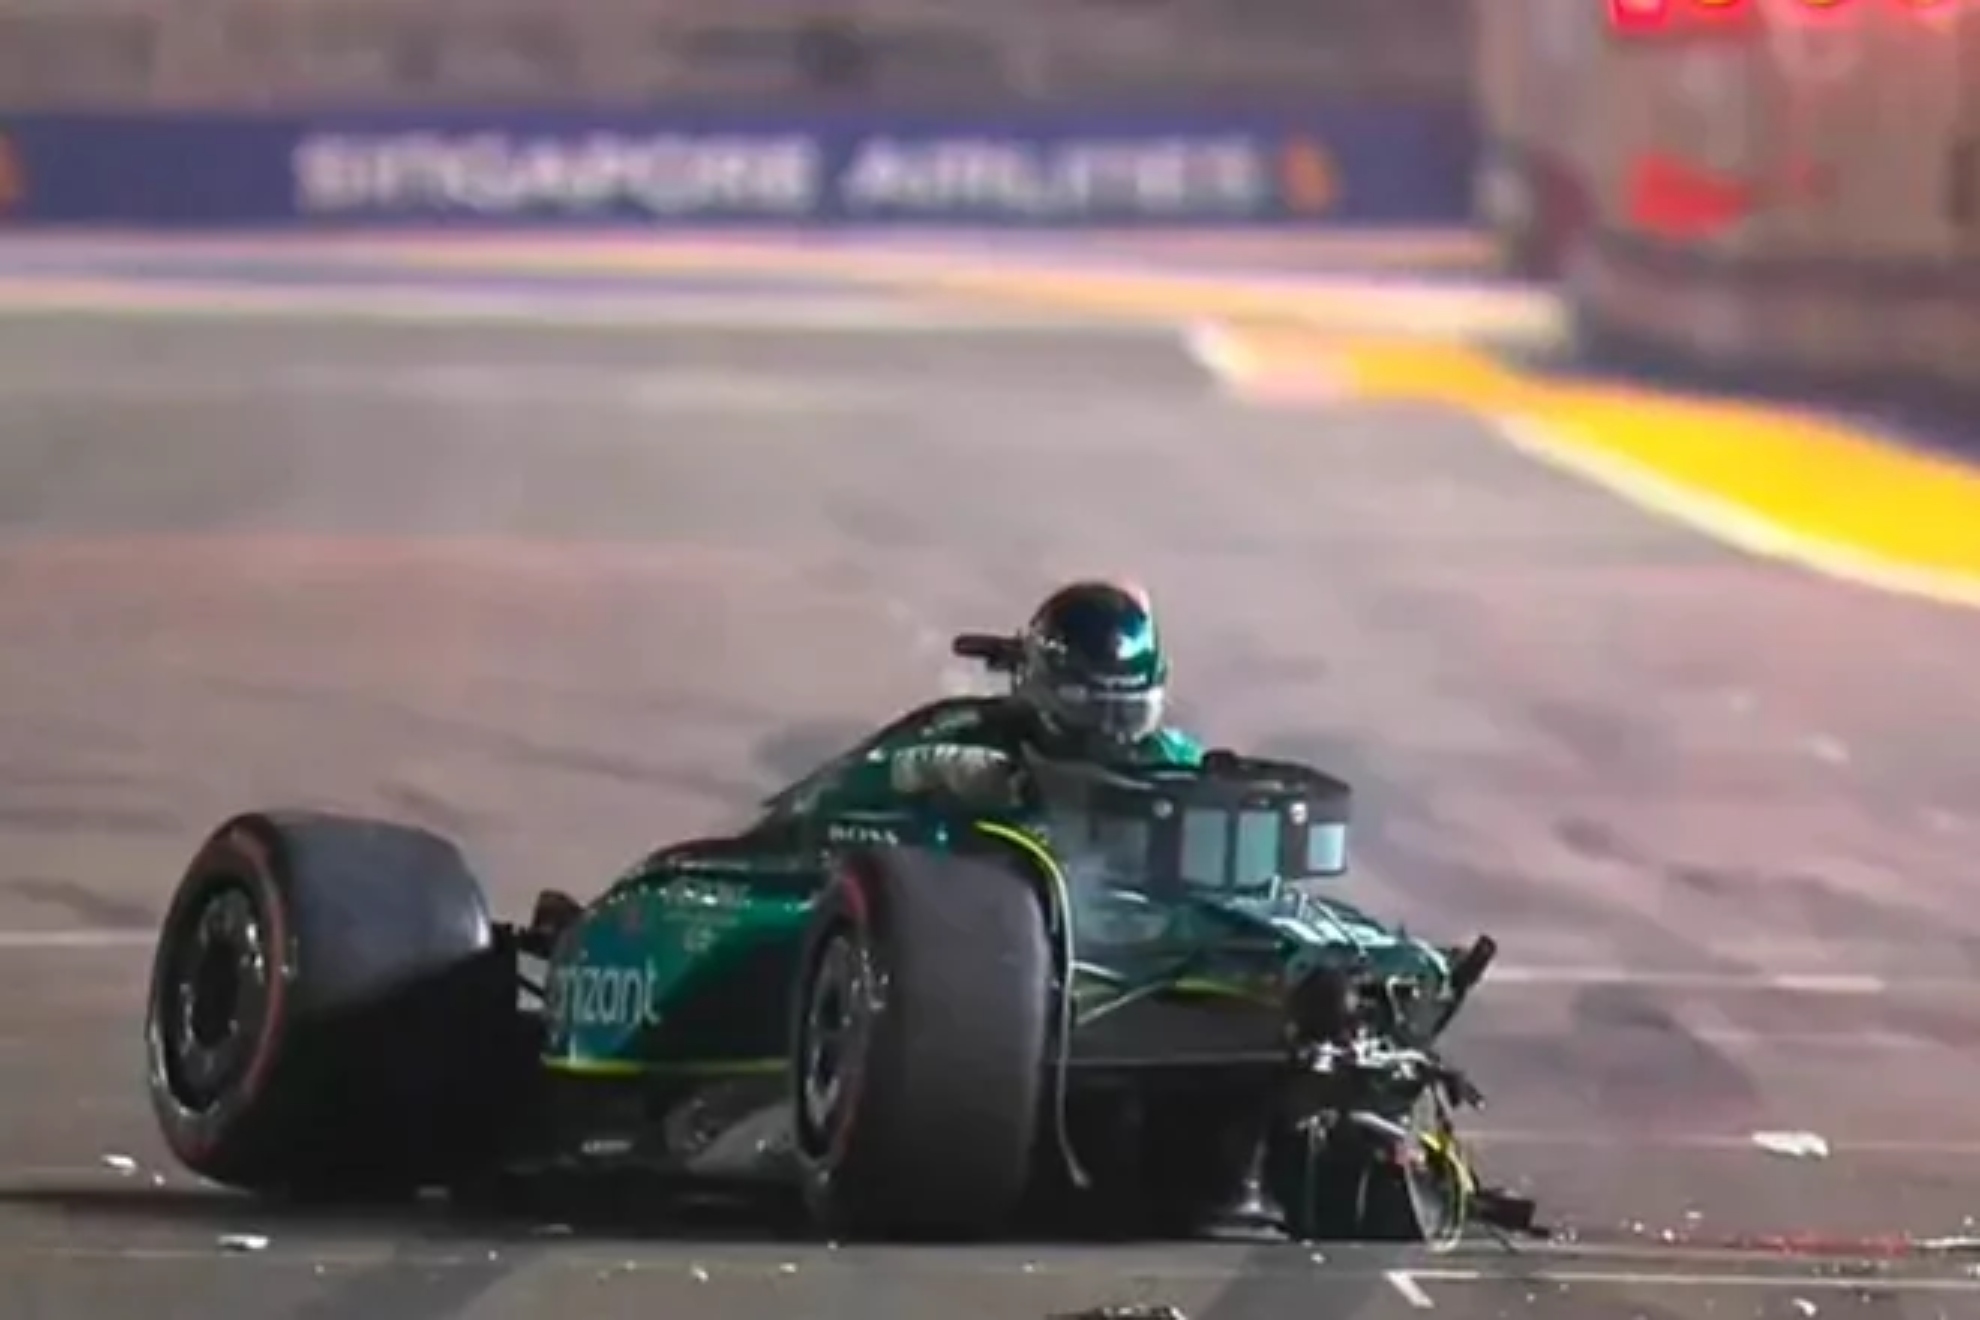 Lance Stroll splits his Aston Martin in half after a bone-shaking accident in Singapore